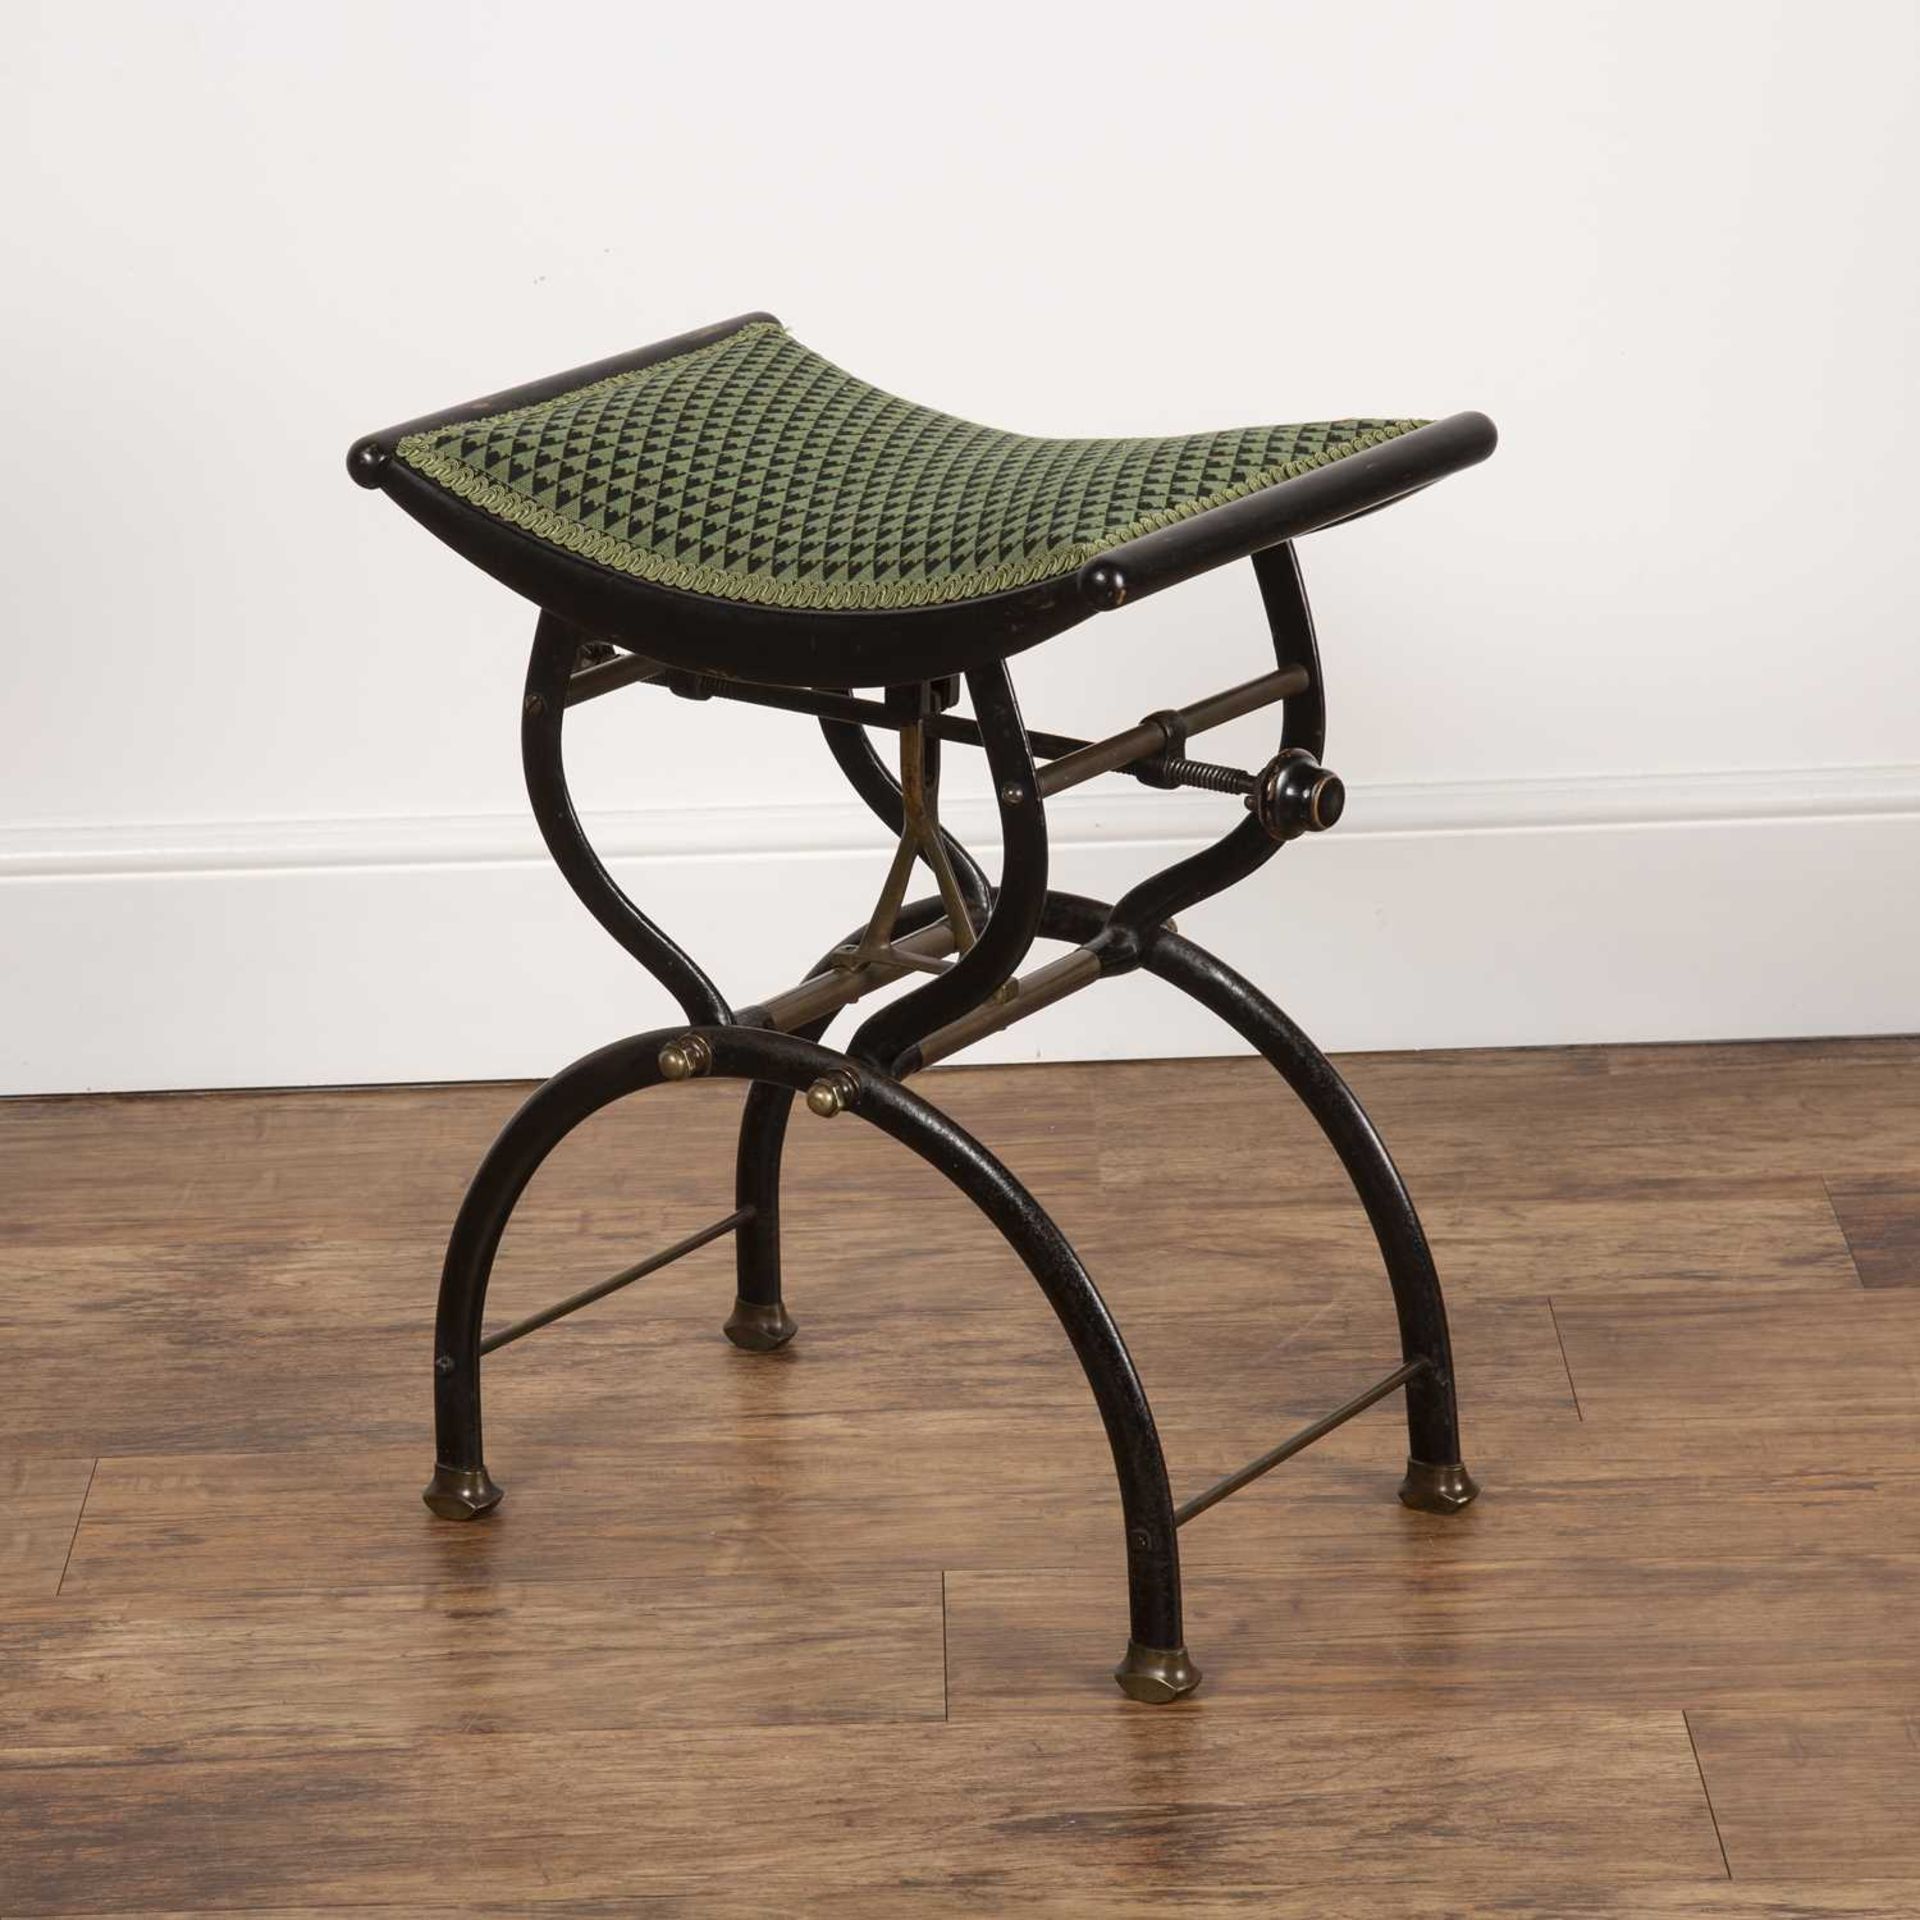 C H Hare & Son Patent stool with rise and fall action, the top with green upholstered seal, cast - Image 3 of 3